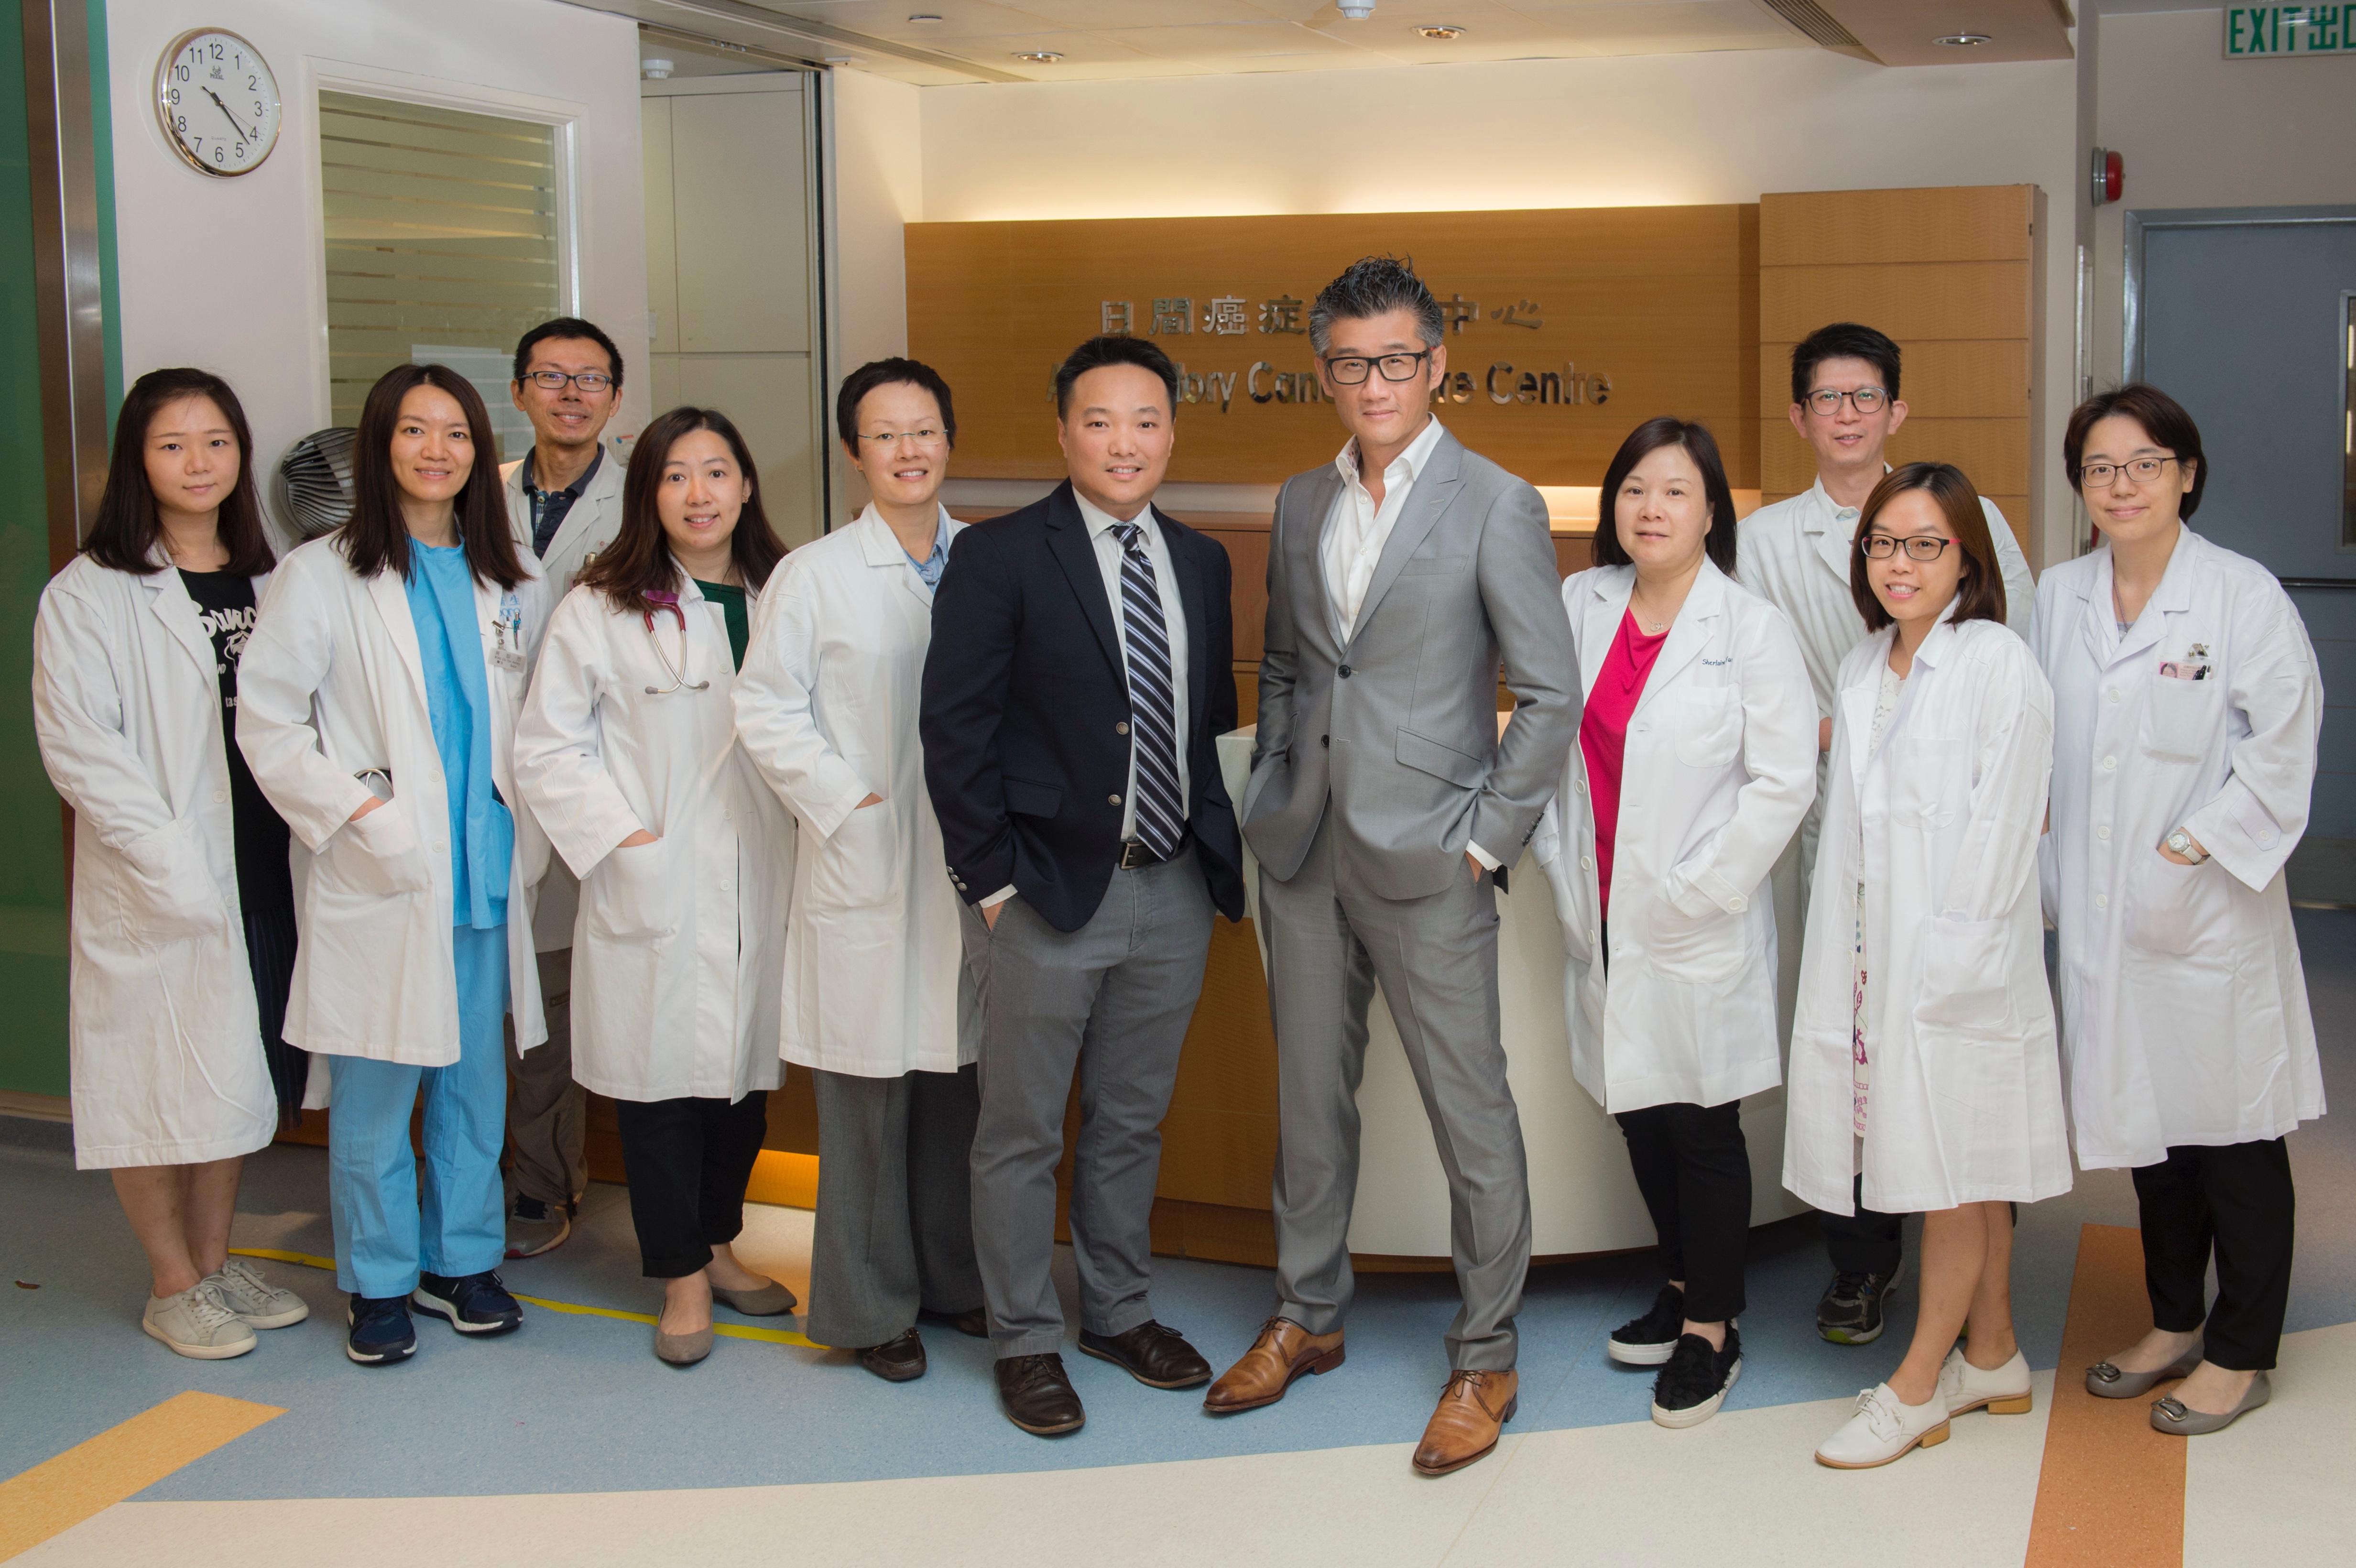 The multidisciplinary team of the Department of Clinical Oncology of the Faculty of Medicine at CUHK receives the 2018 IASLC Foundation Cancer Care Team Award. The team is led by Dr. Herbert LOONG (6th from left), Assistant Professor (Clinical) of the Department, and the team members include oncologists, nurses, research assistants and pharmacists. (5th from right) Professor Tony MOK, Li Shu Fan Medical Foundation Professor of Clinical Oncology and Chairman of the Department of Clinical Oncology of the Faculty of Medicine at CUHK.